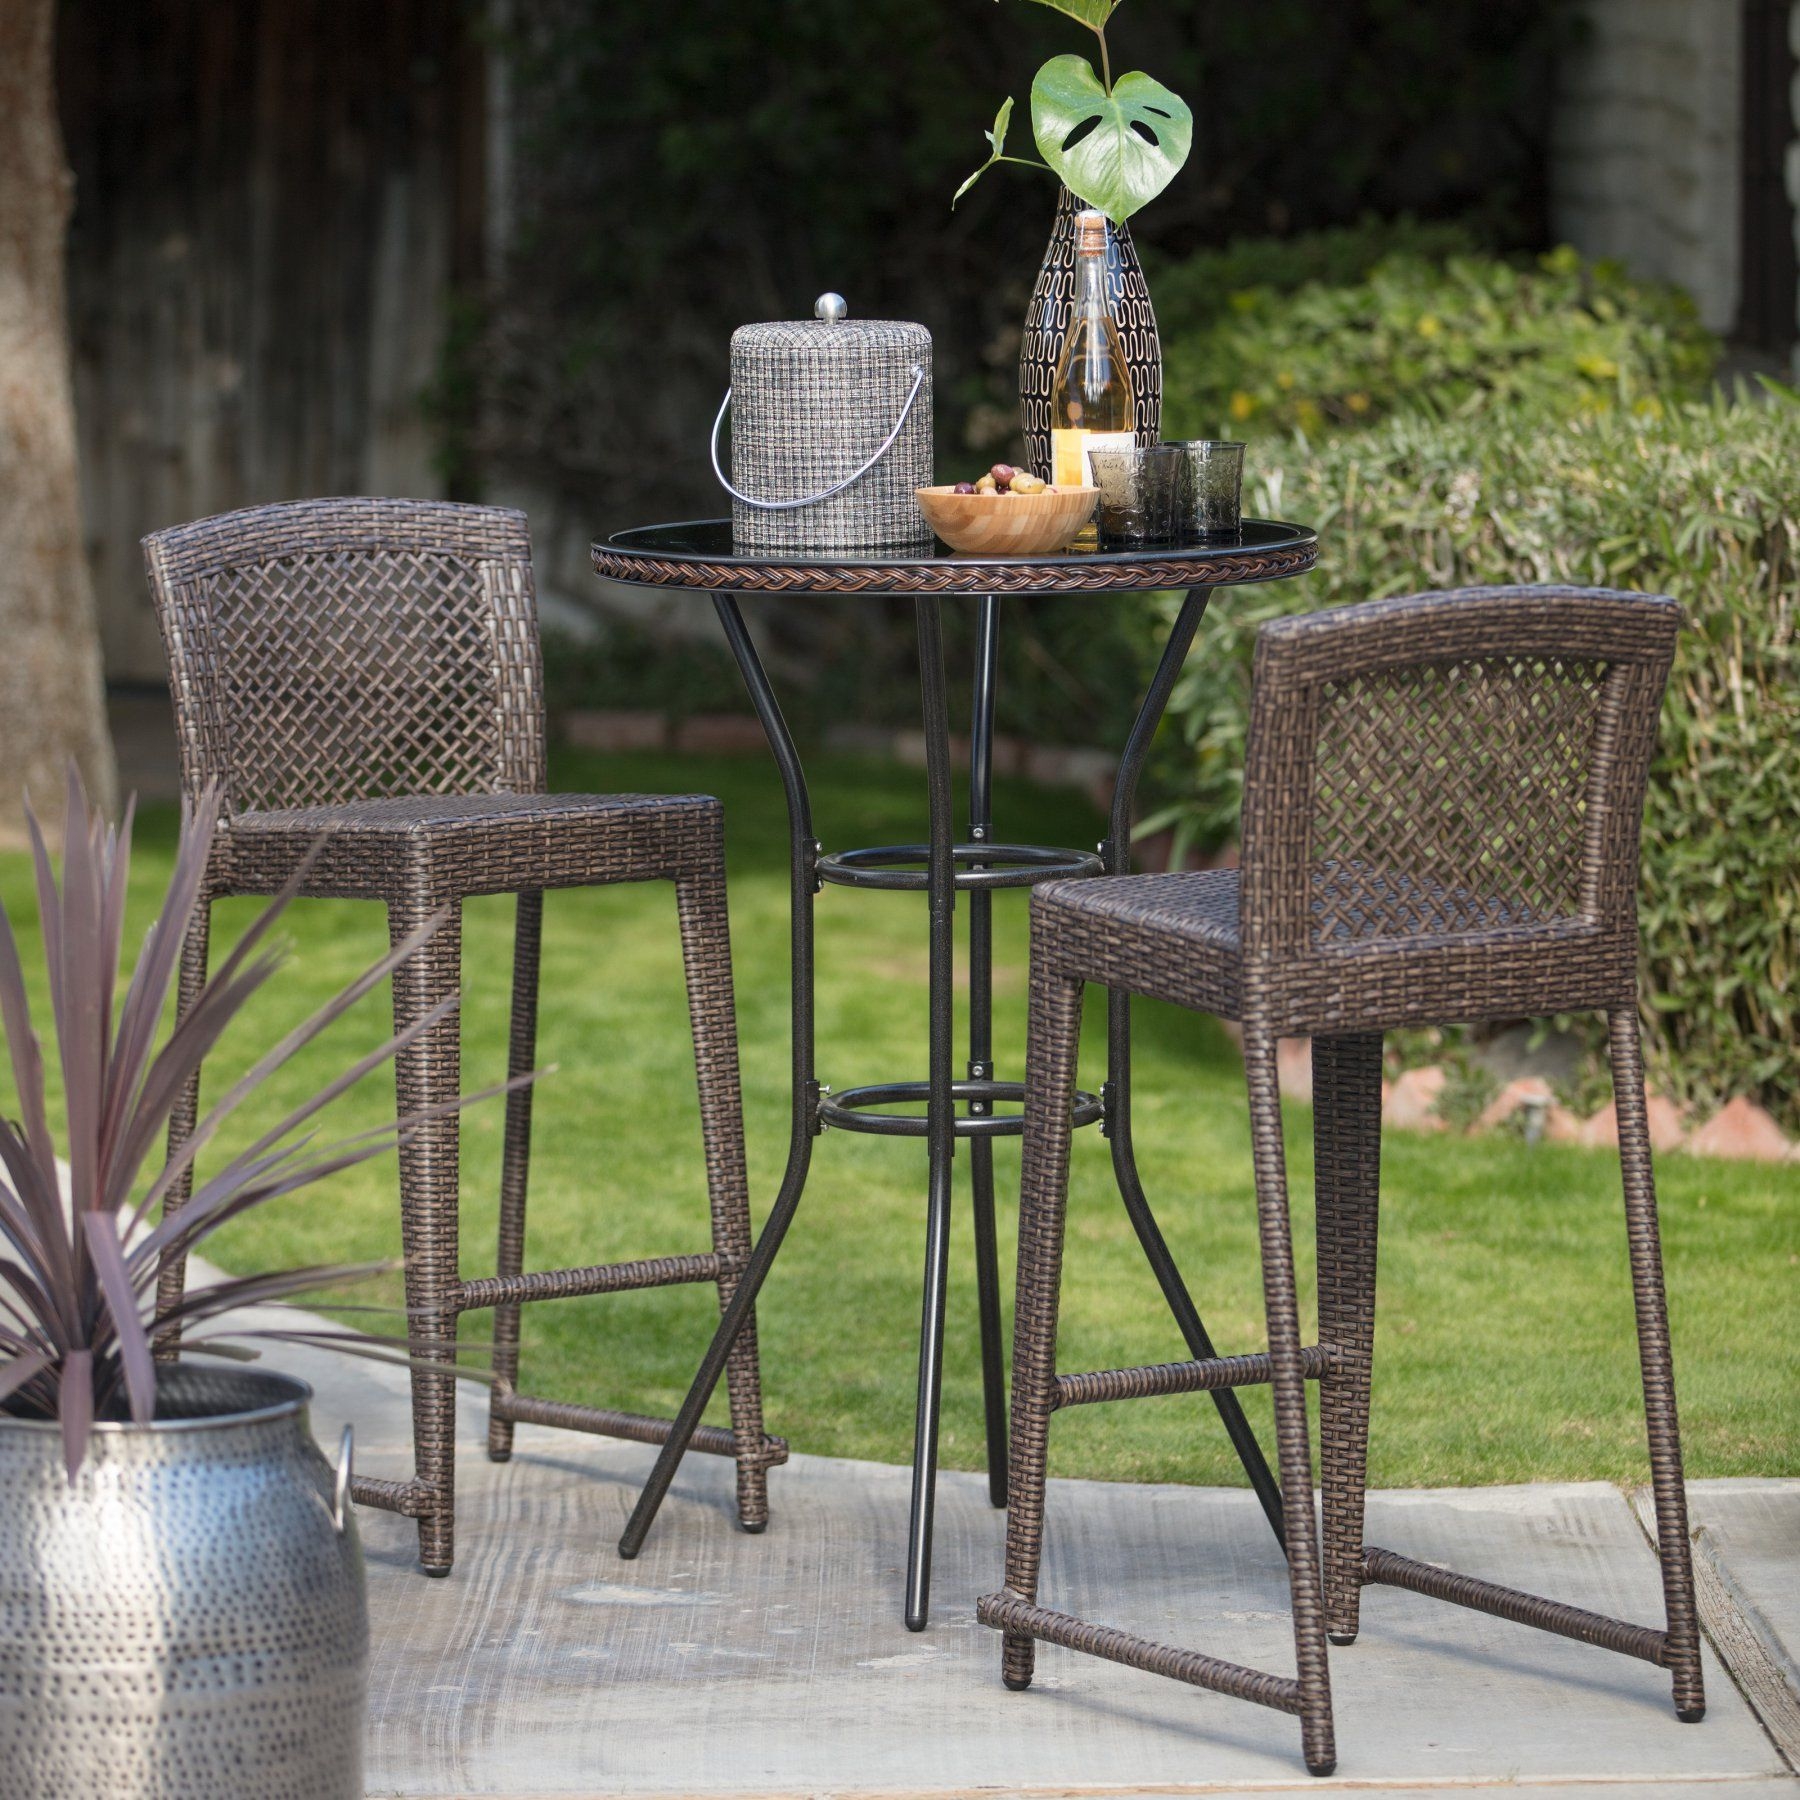 Bar Height Bistro Set Visualhunt, Outdoor High Top Bistro Table And Chairs